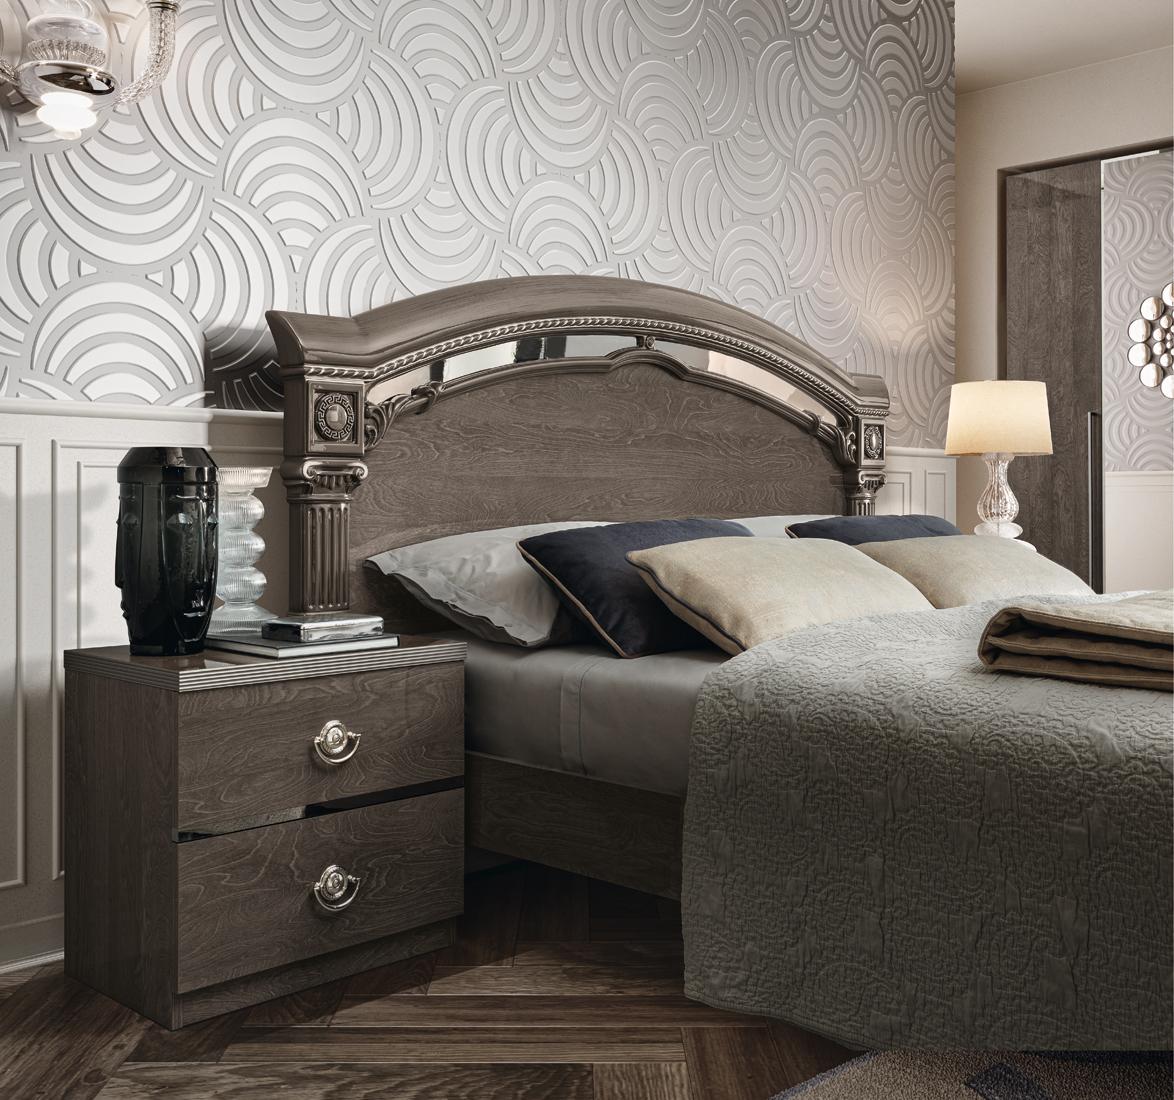 

    
Nabucco-Q-2NDM-5PC Silver Birch High Gloss Lacquer Queen Bedroom Set 5Pcs Made in ITALY ESF Nabucco Night
